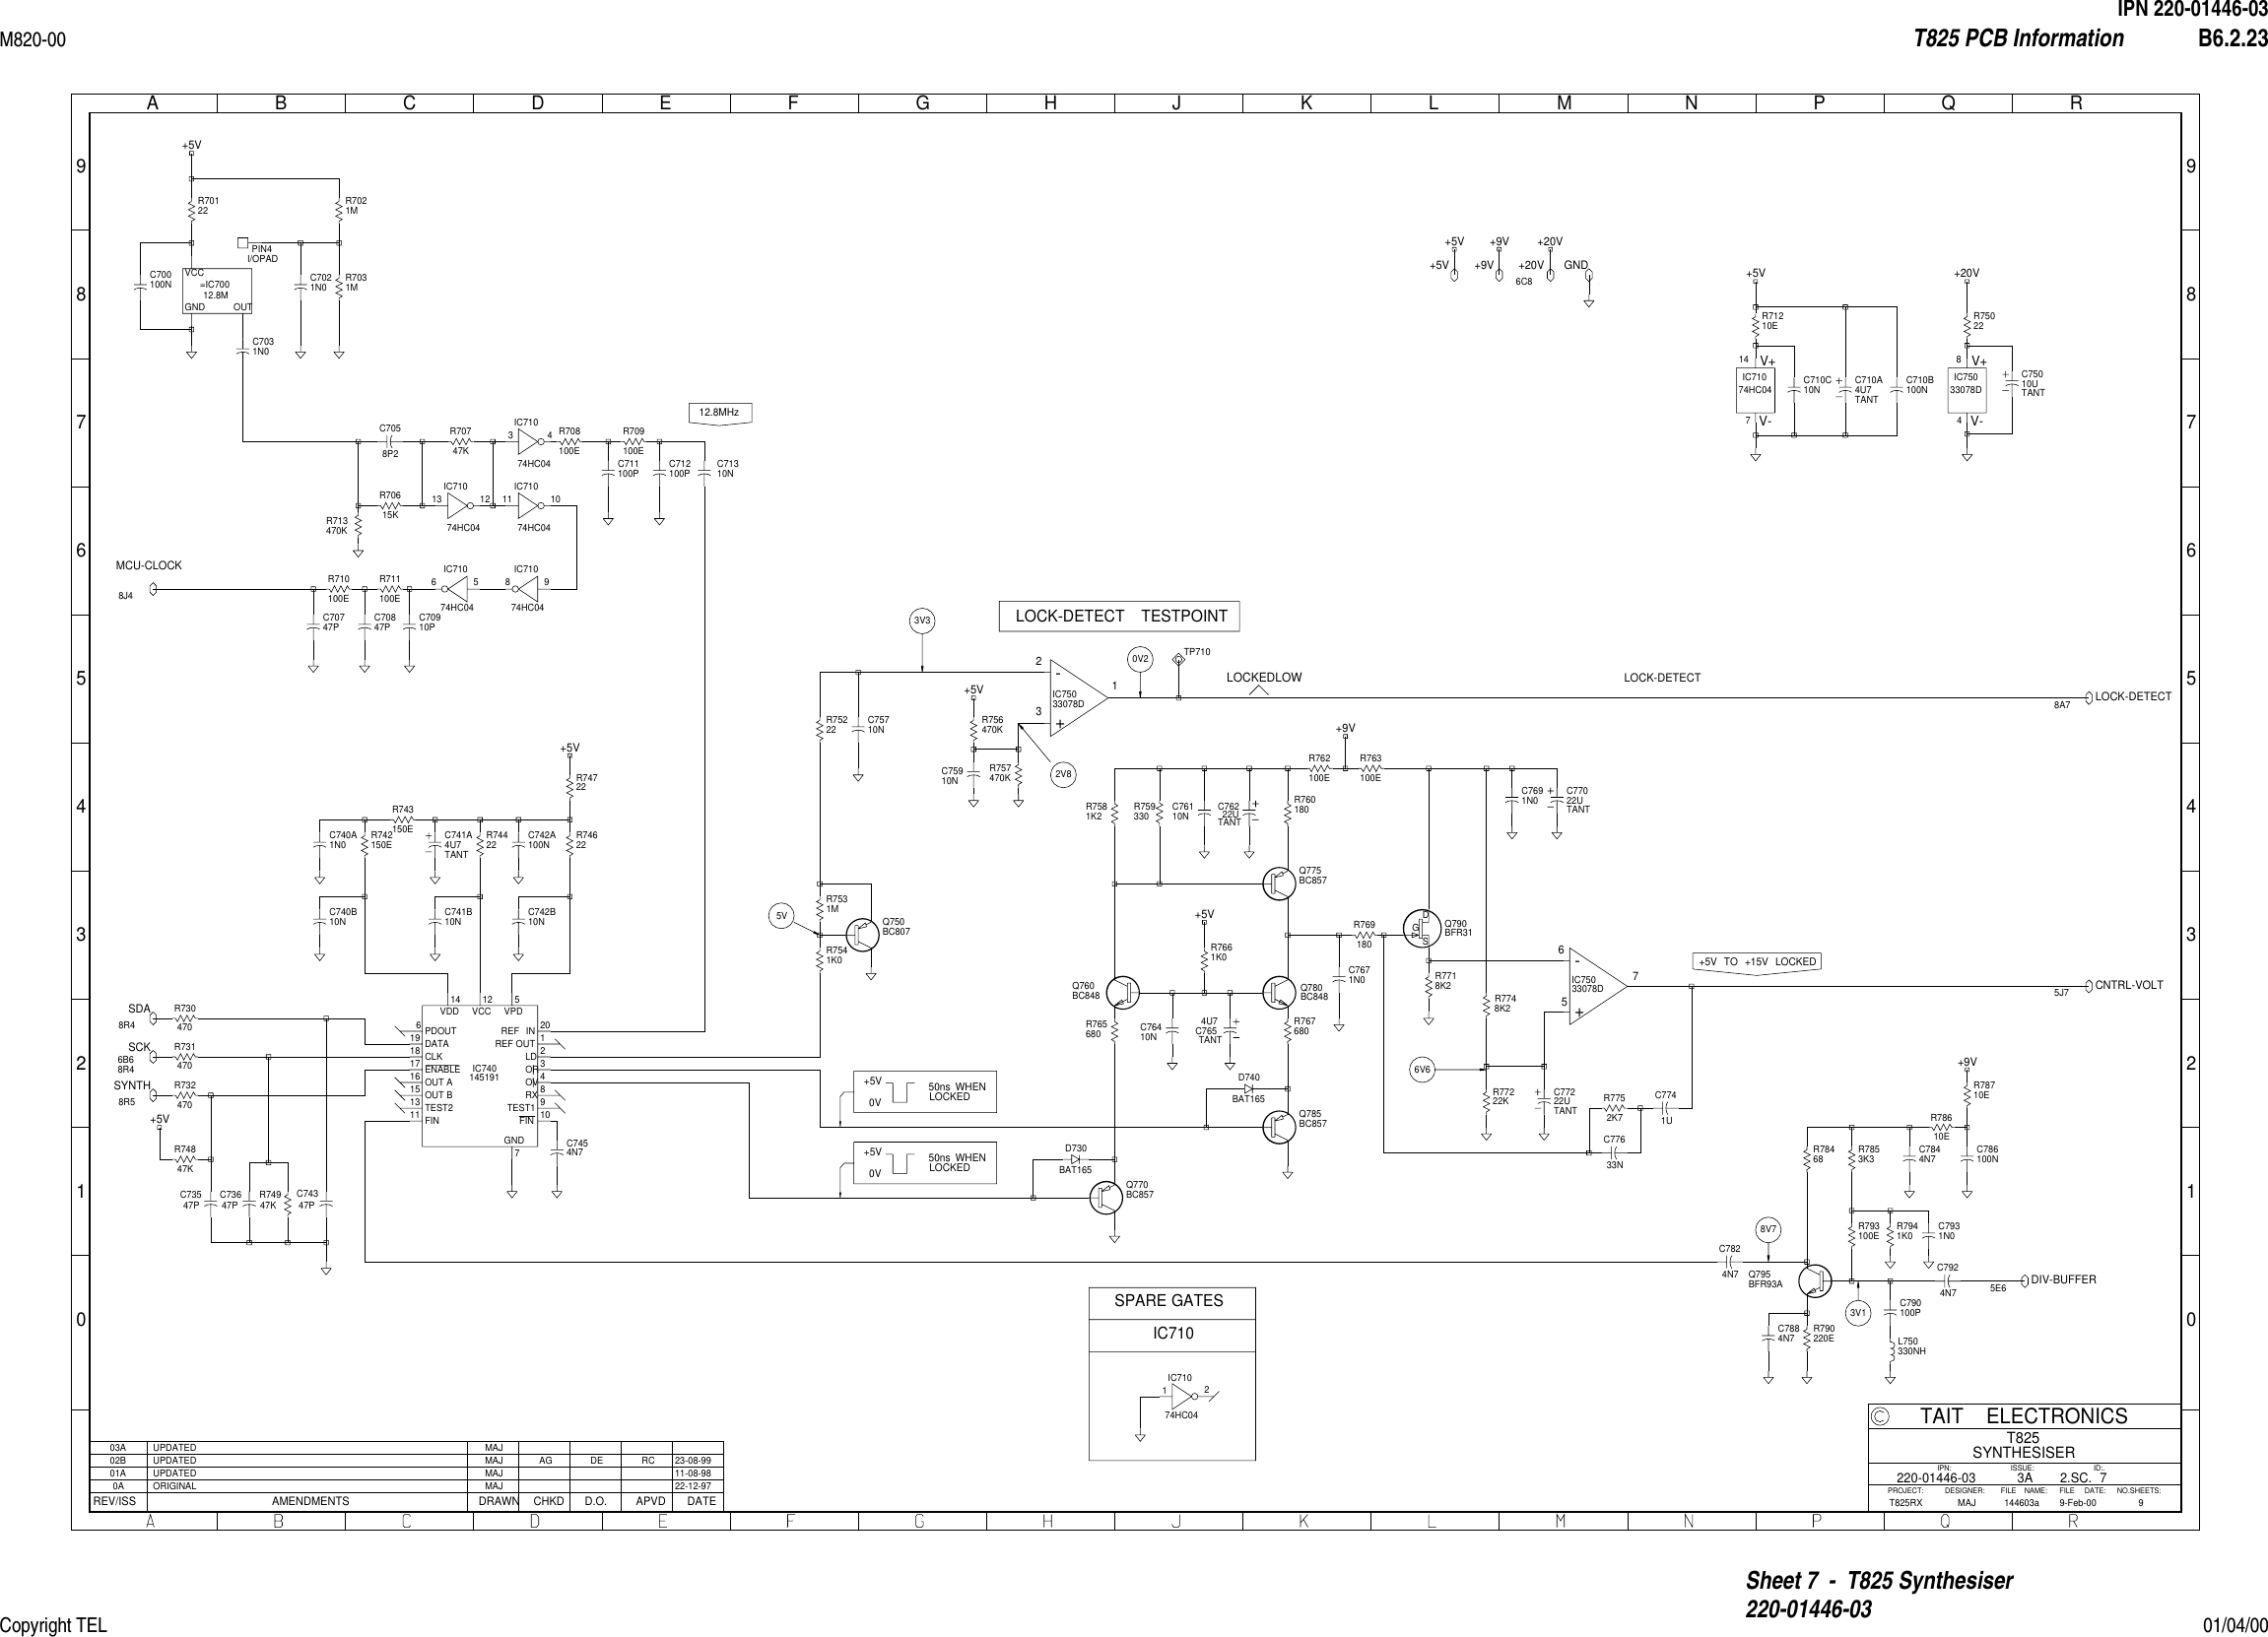 IPN 220-01446-03M820-00 T825 PCB Information B6.2.23Copyright TEL 01/04/00Sheet 7  -  T825 Synthesiser220-01446-0301234567890123456789ABCDEFGHJ KLMNPQRREV/ISS AMENDMENTS DATEAPVDD.O.CHKDDRAWNNO.SHEETS:FILE NAME:TAIT ELECTRONICSIPN:FILE DATE:ISSUE: ID:.2.SC.PROJECT: DESIGNER:79T825SYNTHESISER144603a220-01446-039-Feb-003AT825RX MAJ3V3  0V2  5V  2V8  6V6  8V7  3V1  0A ORIGINAL MAJ    22-12-9701A UPDATED MAJ    11-08-9802B UPDATED MAJ AG DE RC 23-08-9903A UPDATED MAJIC740145191    REF IN 20REF OUT 1LD 2OR3OV 4RX 8TEST1 9FIN 10GND7VPD5VCC12VDD14PDOUT6DATA19CLK18ENABLE17OUT A16OUT B15TEST213FIN11R78710E    R7853K3    R78468    C7844N7    C7884N7    C7824N7    R70122        12.8M=IC700GND OUTVCC R7031M    R7021M    C700100N    C710B100N    C710C10N    C7058P2    R70615K    R70747K    R71210E    C7031N0    R710100E    TANTC710A4U7    C77633N    C71310N    C741B10N    R74422    C740B10N    R742150E    R74622    R74722    C742B10N    C742A100N    TANTC741A4U7    R767680    R7541K0    R7531M    R75222    C75710N    R75022    TANTC75010U    R757470K     R756470K    C75910N     C76410N     TANTC7654U7    R7661K0    R765680    R760180    R7581K2    C76110N     TANTC76222U    C7671N0    R769180    R762100E    R7718K2    R763100E    TANTC77022U    TANTC77222U    C7691N0    R7748K2    R77222K    R7752K7    R790220E    C786100N    C74347P    C73647P    C73547P    R74847K    R78610E    C7924N7    C7454N7    R74947K    R743150E    C740A1N0    R709100E    IC71074HC04    34IC71074HC04    13 12IC71074HC04    11 10IC71074HC04    98IC71074HC04    56C7021N0    C711100P    C712100P    R708100E    IC71074HC04    12TP710    +-IC75033078D    321+-IC75033078D    567IC75033078D    V-4V+8Q760BC848    Q780BC848    Q795BFR93A    Q750BC807    Q770BC857    Q785BC857    Q775BC857    DSGQ790BFR31    D730BAT165    D740BAT165    R759330     C790100P    L750330NH    C70747P    C70847P    C70910P    R711100E    R793100E    R7941K0    C7931N0    R713470K     PIN4    I/OPADC7741U    IC71074HC04    V-7V+14R730470    R731470    R732470    +9V+5V+5V+5V+5V+5V+9V+5V+5V +9V+20V+20VCNTRL-VOLT5J7DIV-BUFFER5E6LOCK-DETECT8A7SCK6B28R48R4SYNTH8R5SDA8R4+5V6B88D9+20V6C8GND1R01R02N03R04A35C76B08E99C4+9V2A83B84A45C86B88D9MCU-CLOCK8J4SPARE GATESIC710LOCK-DETECT TESTPOINTLOCKEDLOW6B68R450ns WHEN+5V0V LOCKED50ns WHEN+5V0V LOCKED+5V TO +15V LOCKED12.8MHzLOCK-DETECT